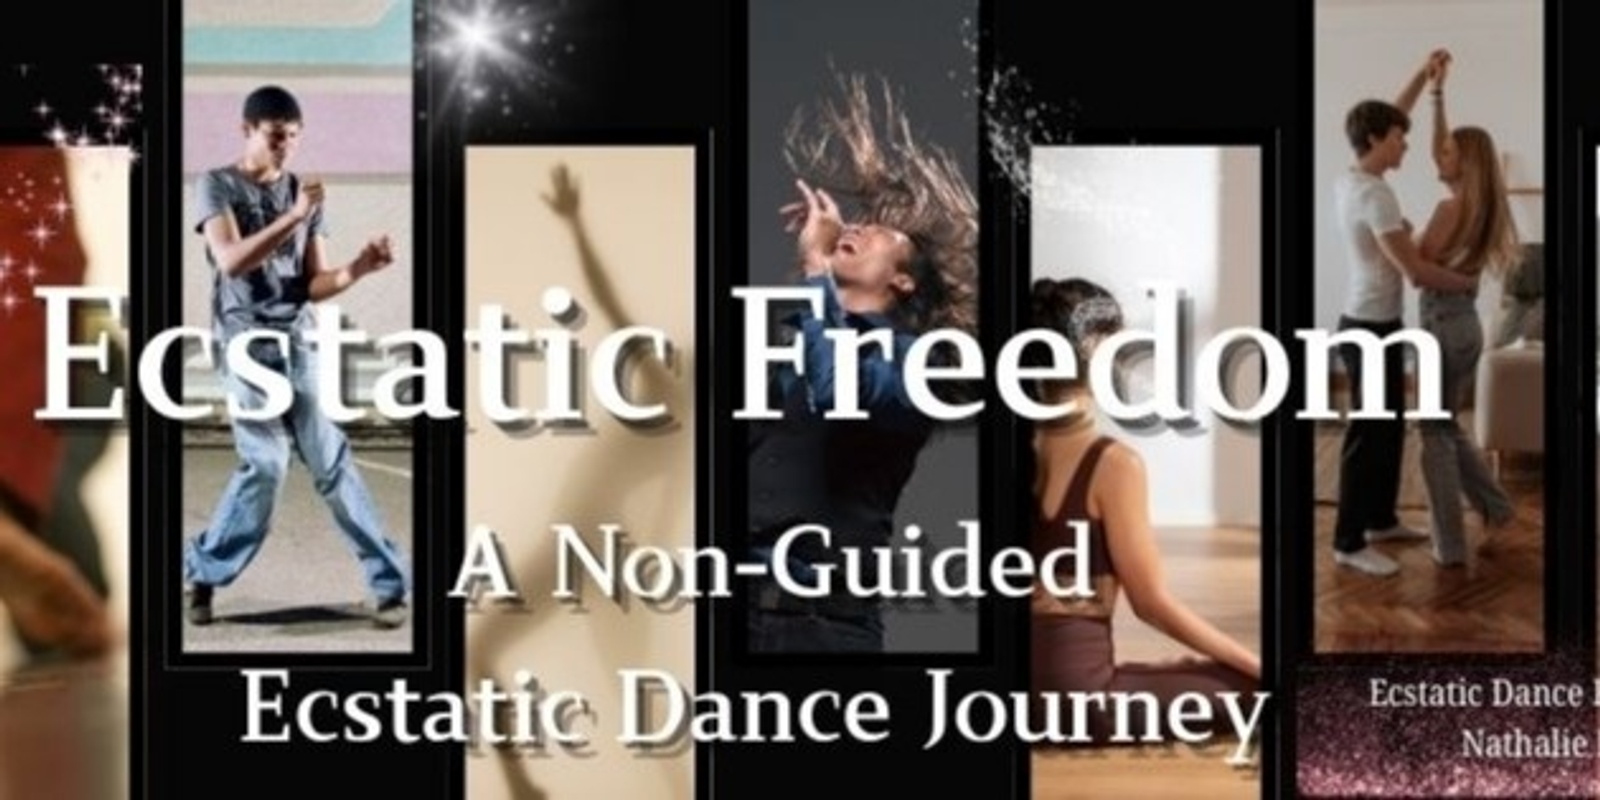 Banner image for Ecstatic Freedom - A Non-Guided Ecstatic Dance Journey